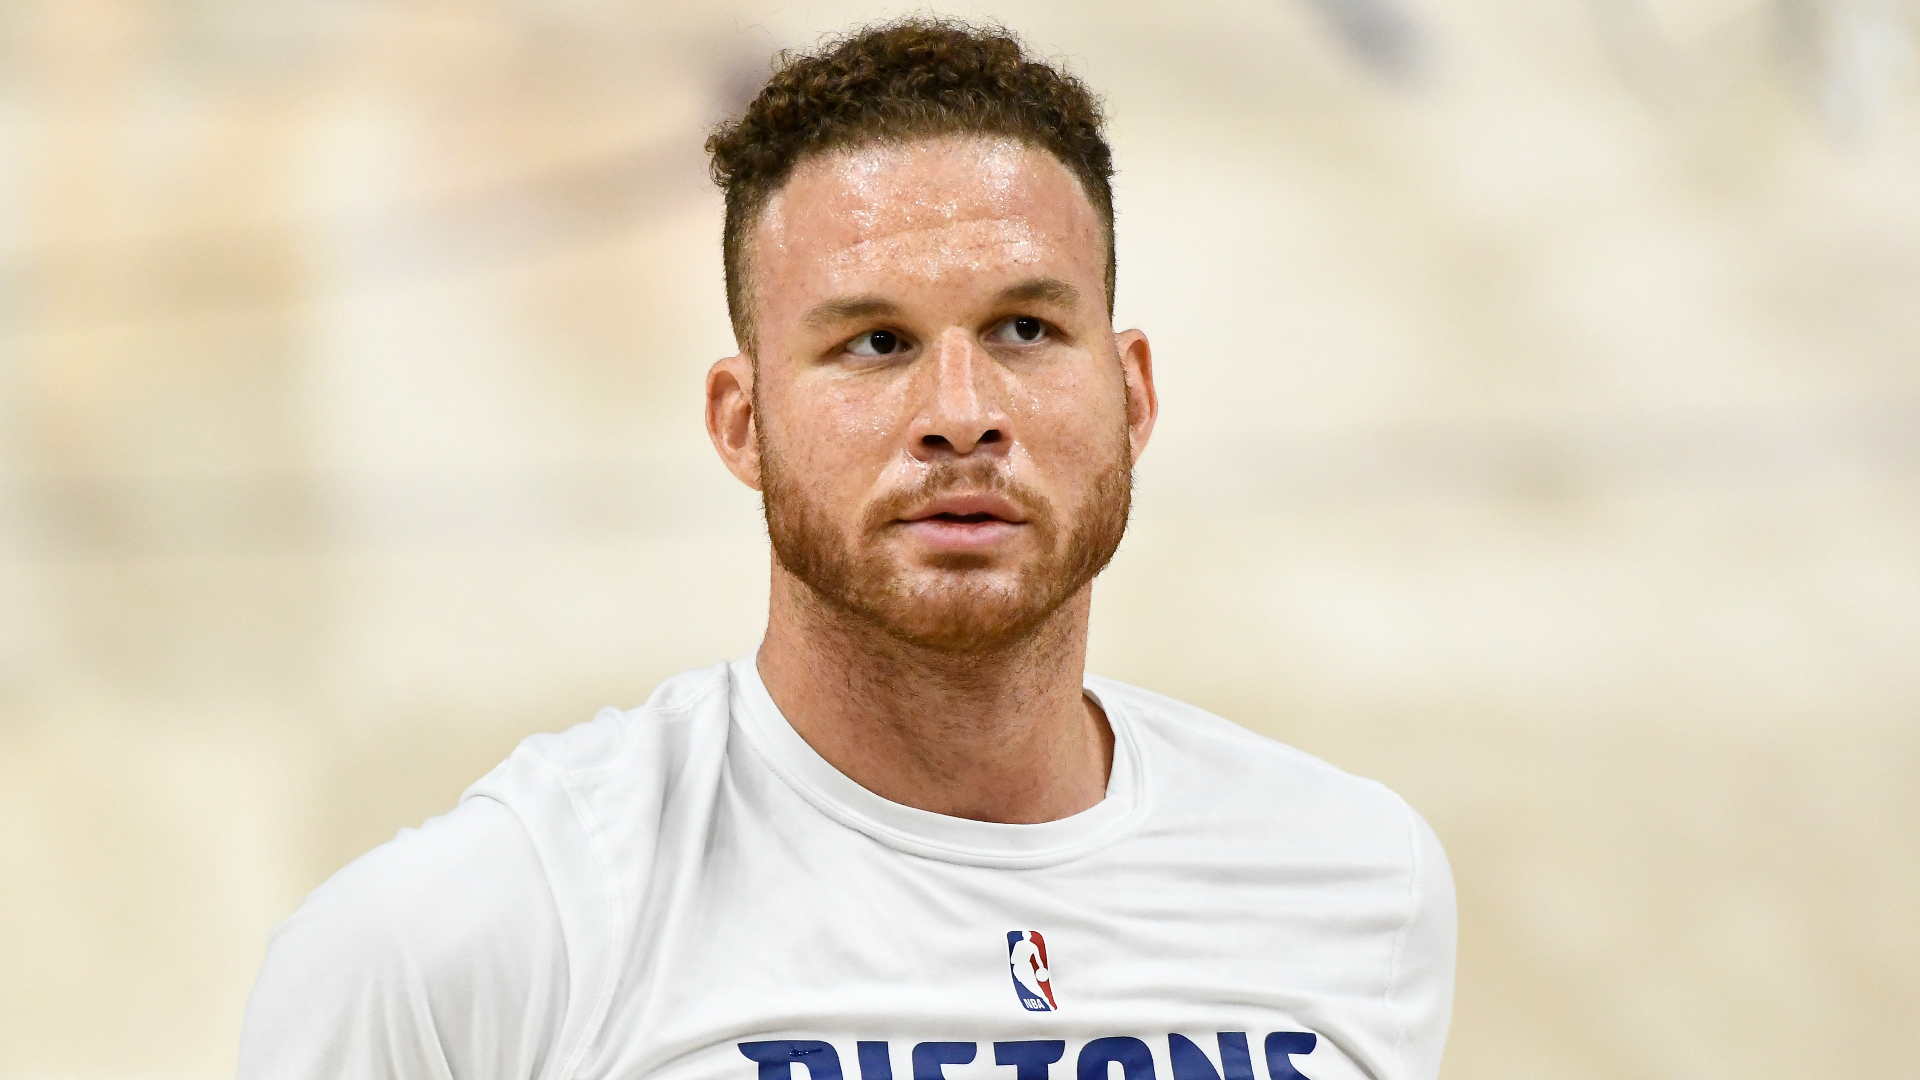 Blake Griffin Signs with The Nets